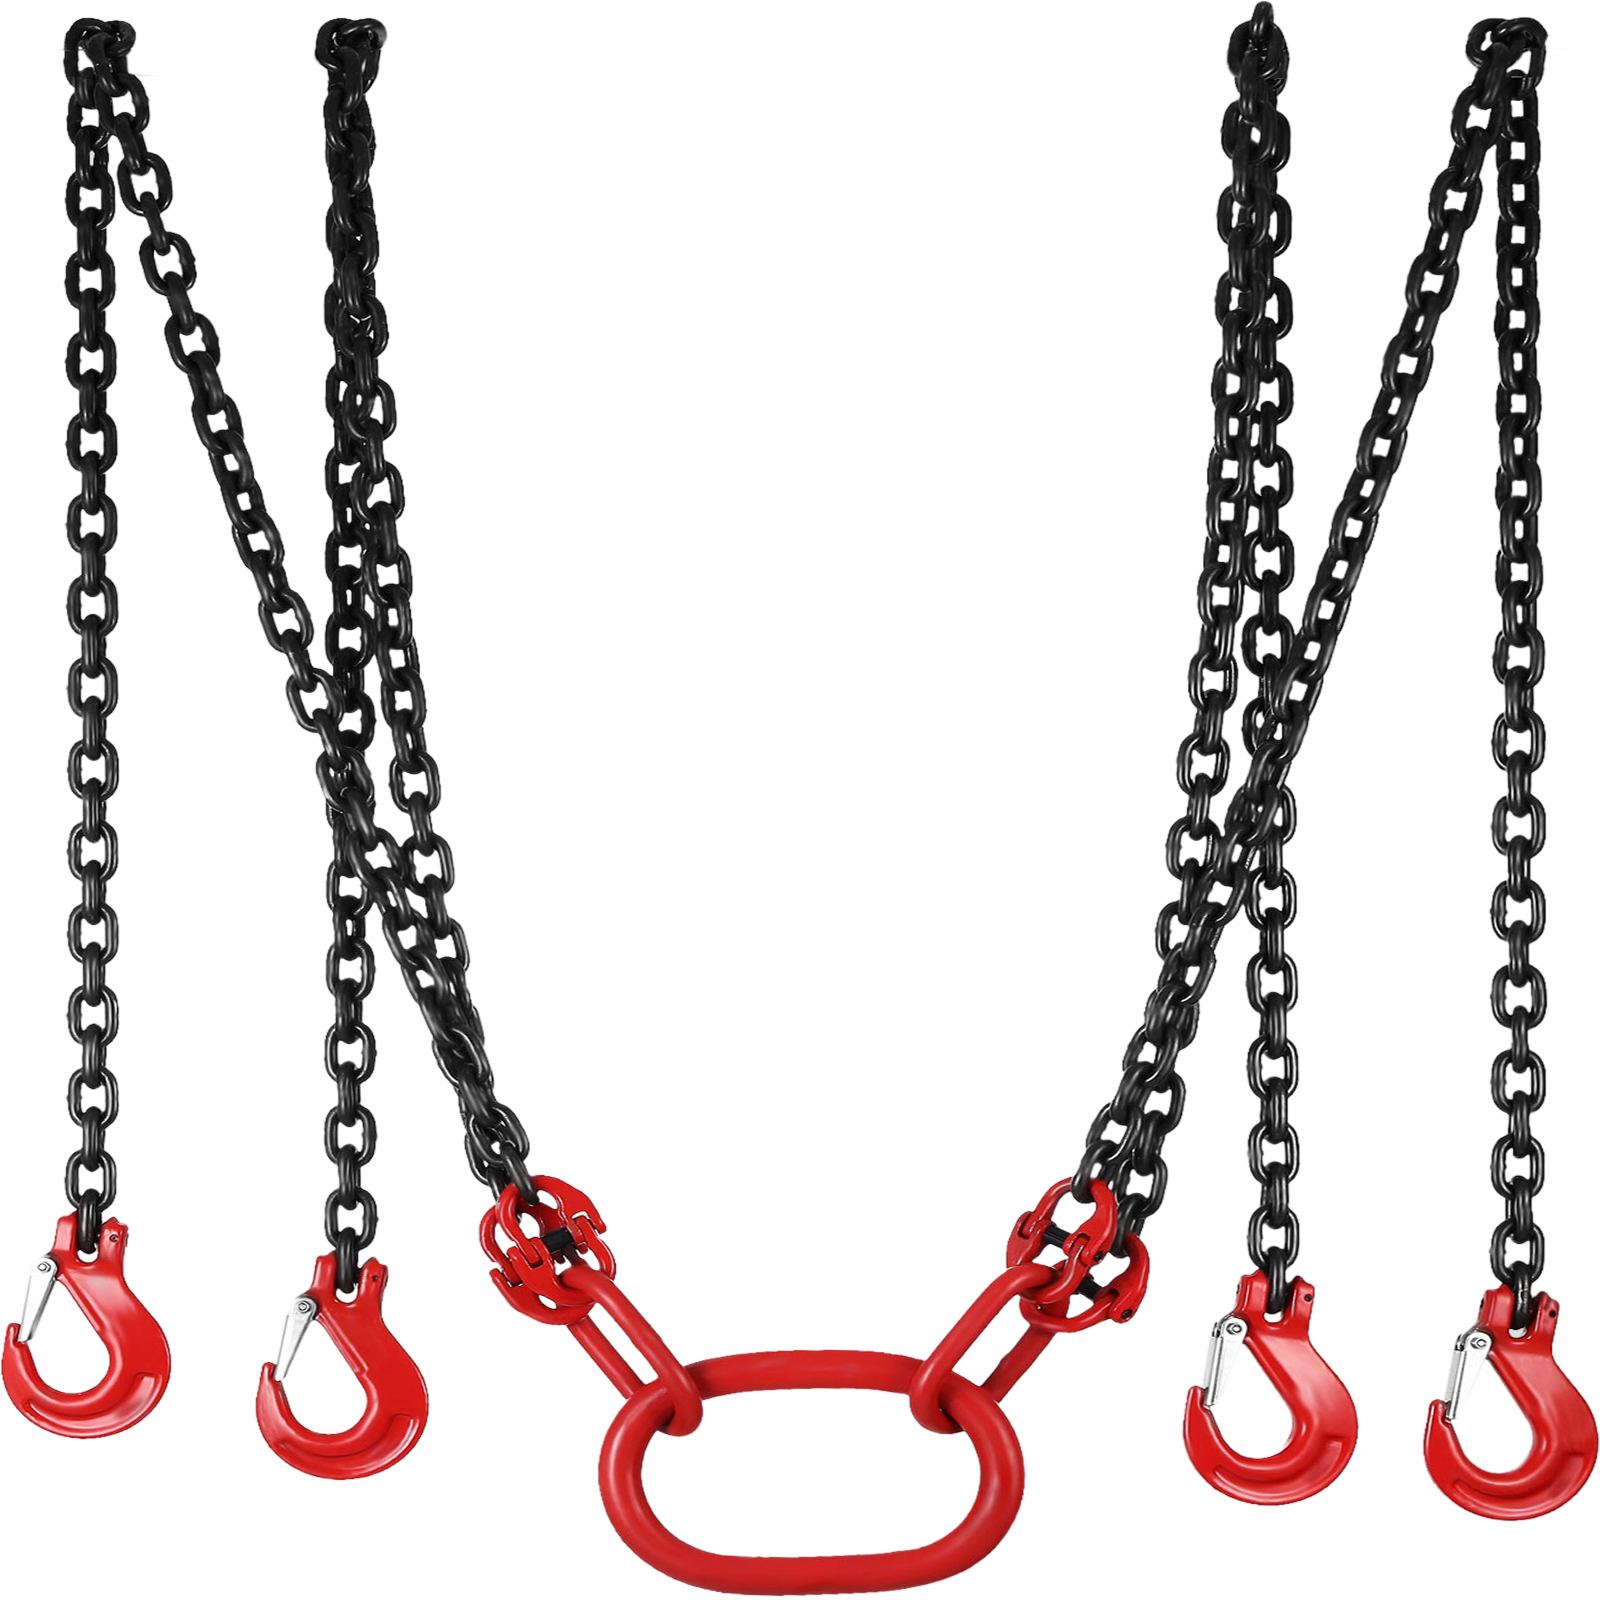 13 Foot Lifting Chain Sling Four Leg Hook Chains Alloy Steel Grade 80 Top от Vevor Many GEOs